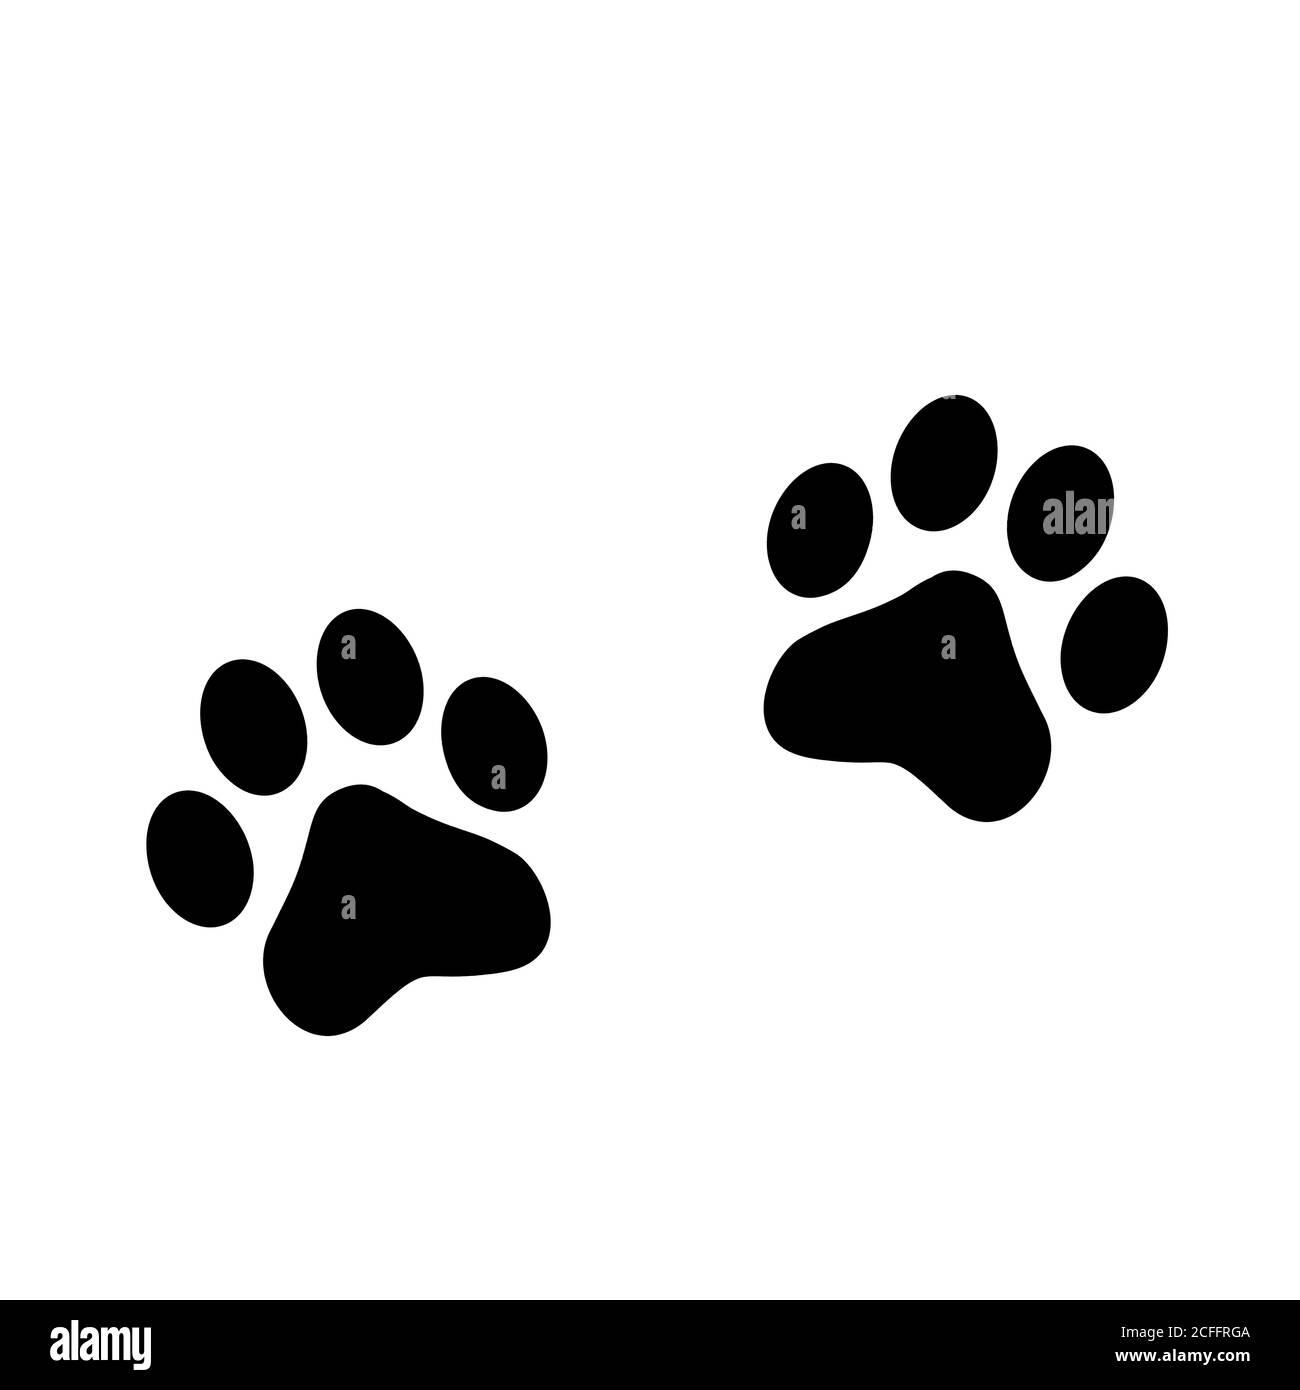 Page 2 - Cat Paw Print High Resolution Stock Photography and Images - Alamy